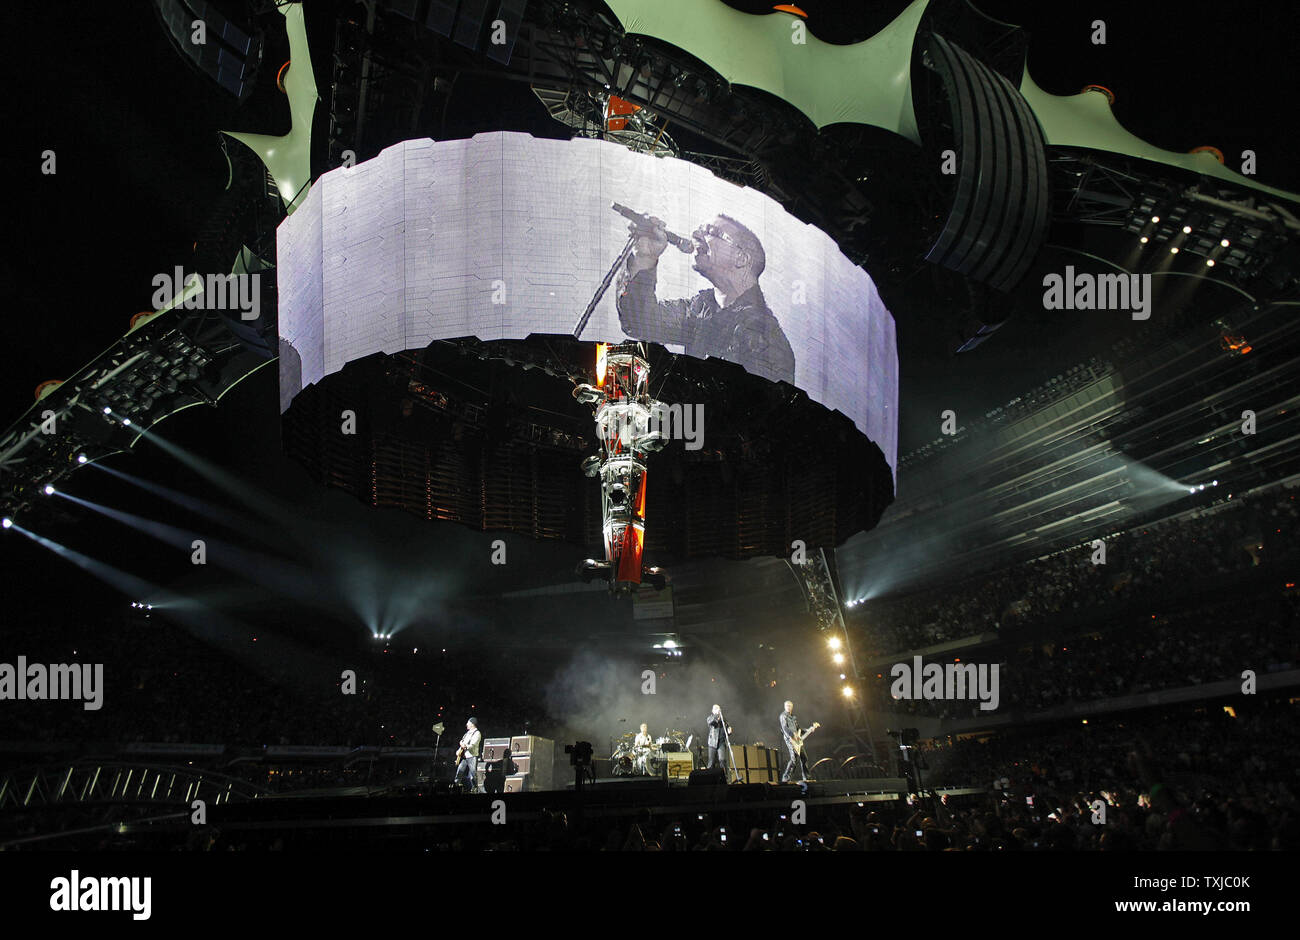 U2 performs the first concert of their 360 Degree North American Tour at Soldier Field in Chicago on September 12, 2009.     UPI/Brian Kersey Stock Photo